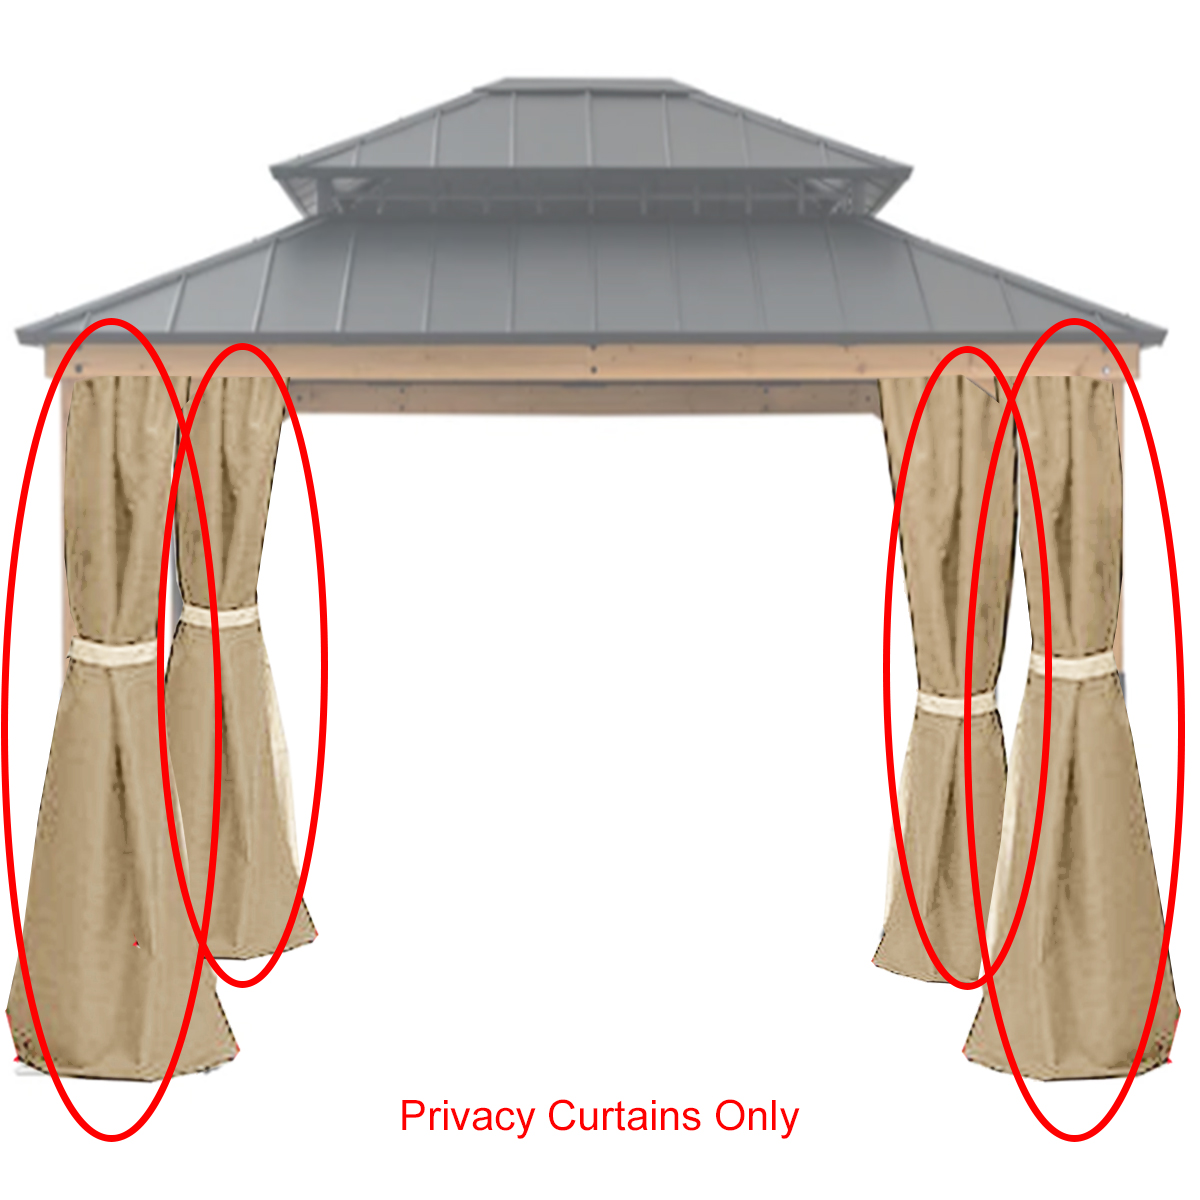 Universal Replacement Privacy Curtain Set for 10' X 12' Hard Top